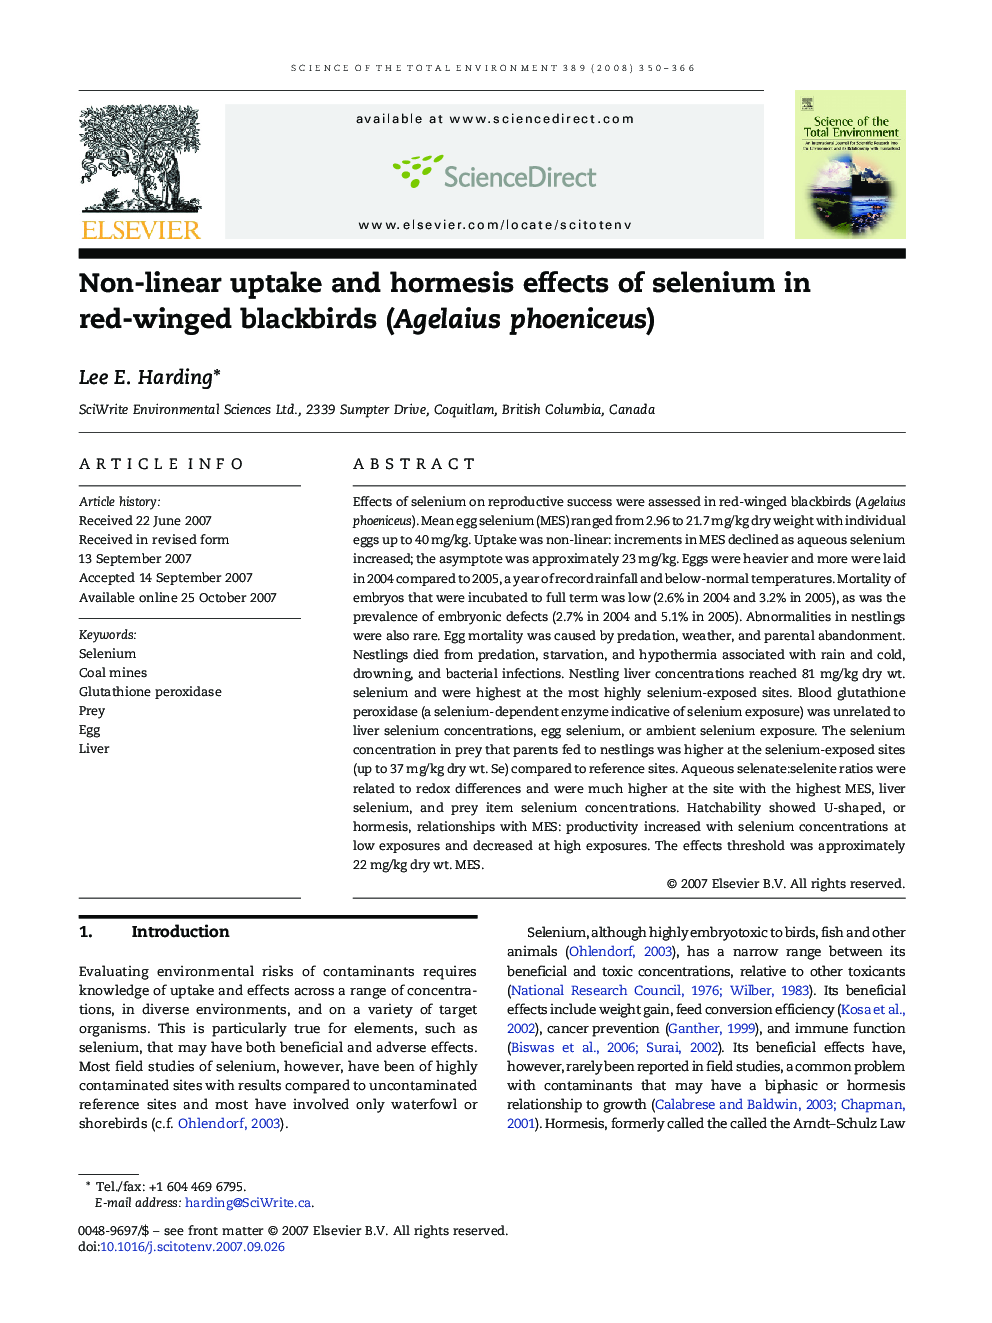 Non-linear uptake and hormesis effects of selenium in red-winged blackbirds (Agelaius phoeniceus)